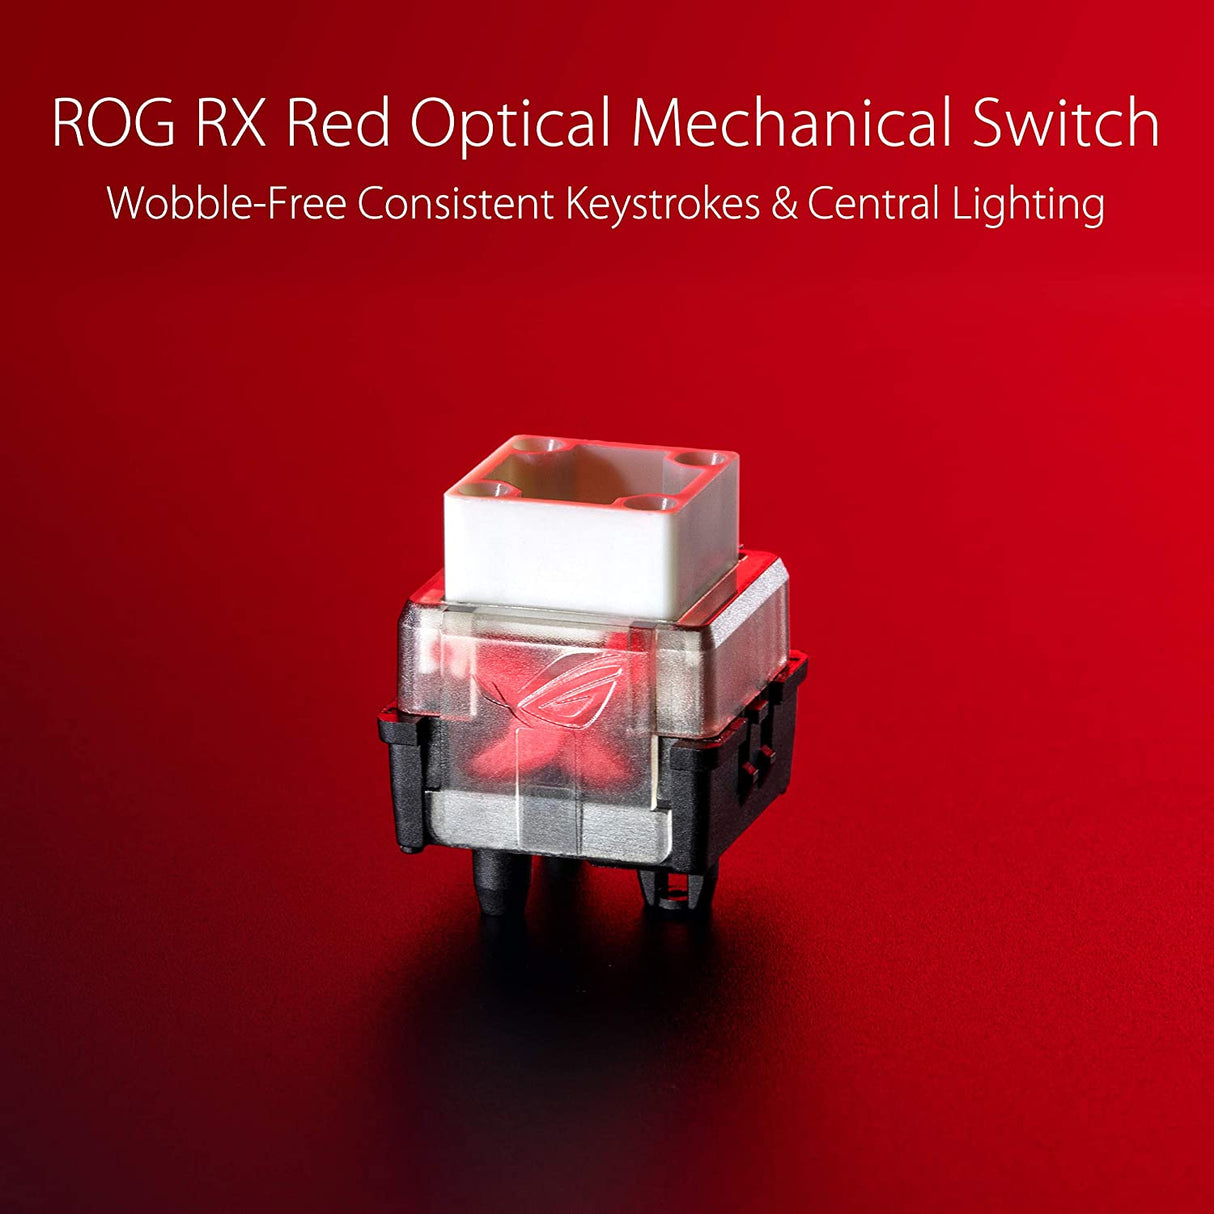 ASUS Mechanical Gaming Keyboard - ROG Strix Scope RX | Red Optical Mechanical Switches | USB 2.0 Passthrough | 2X Wider Ctrl Key for Greater FPS Precision | Aura Sync, Armoury Crate RGB Lighting ROG Red Optical Switches